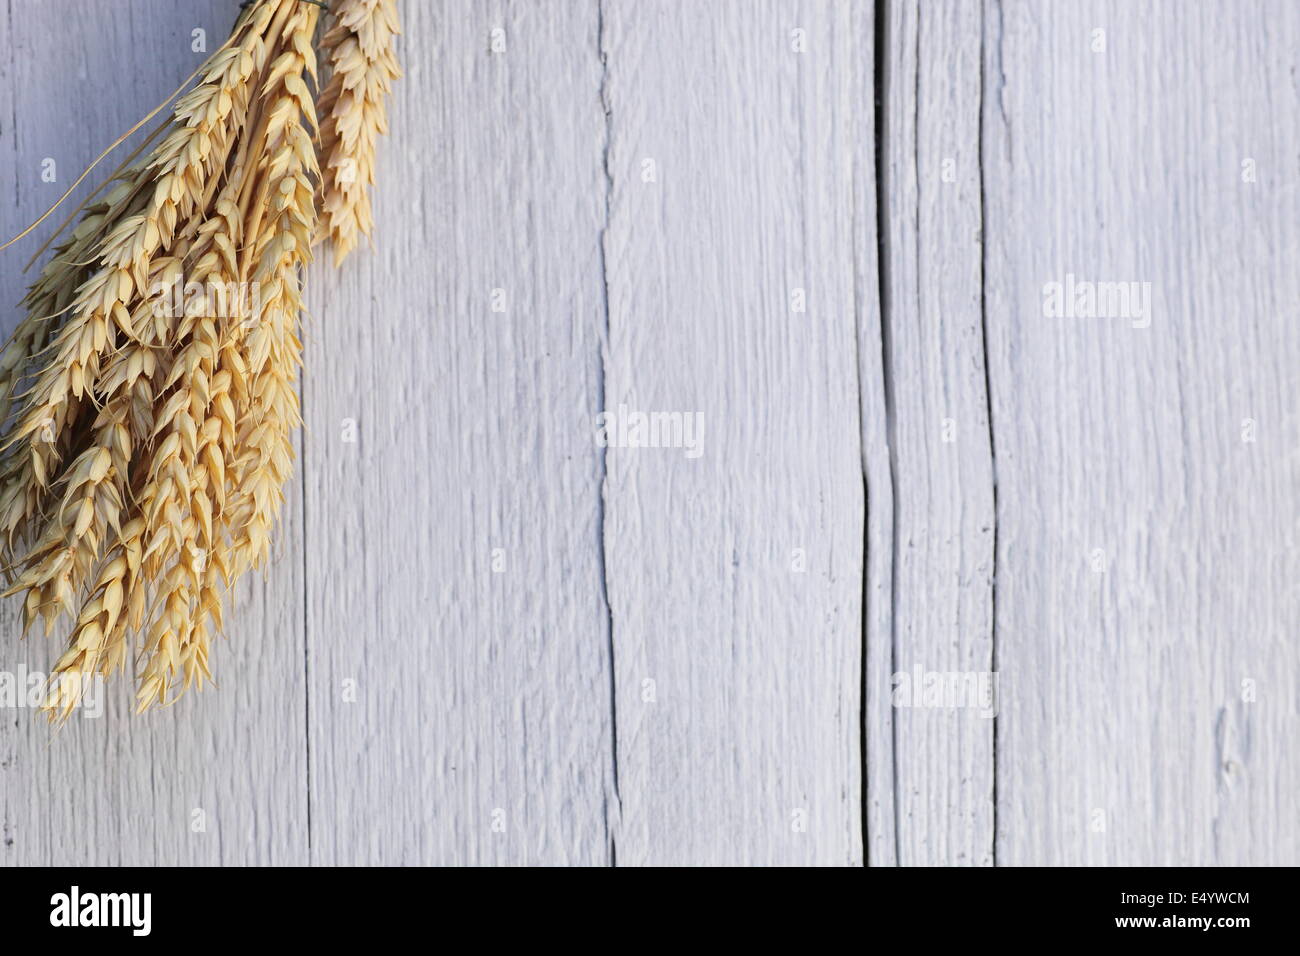 Ears of wheat on a white wood background Stock Photo